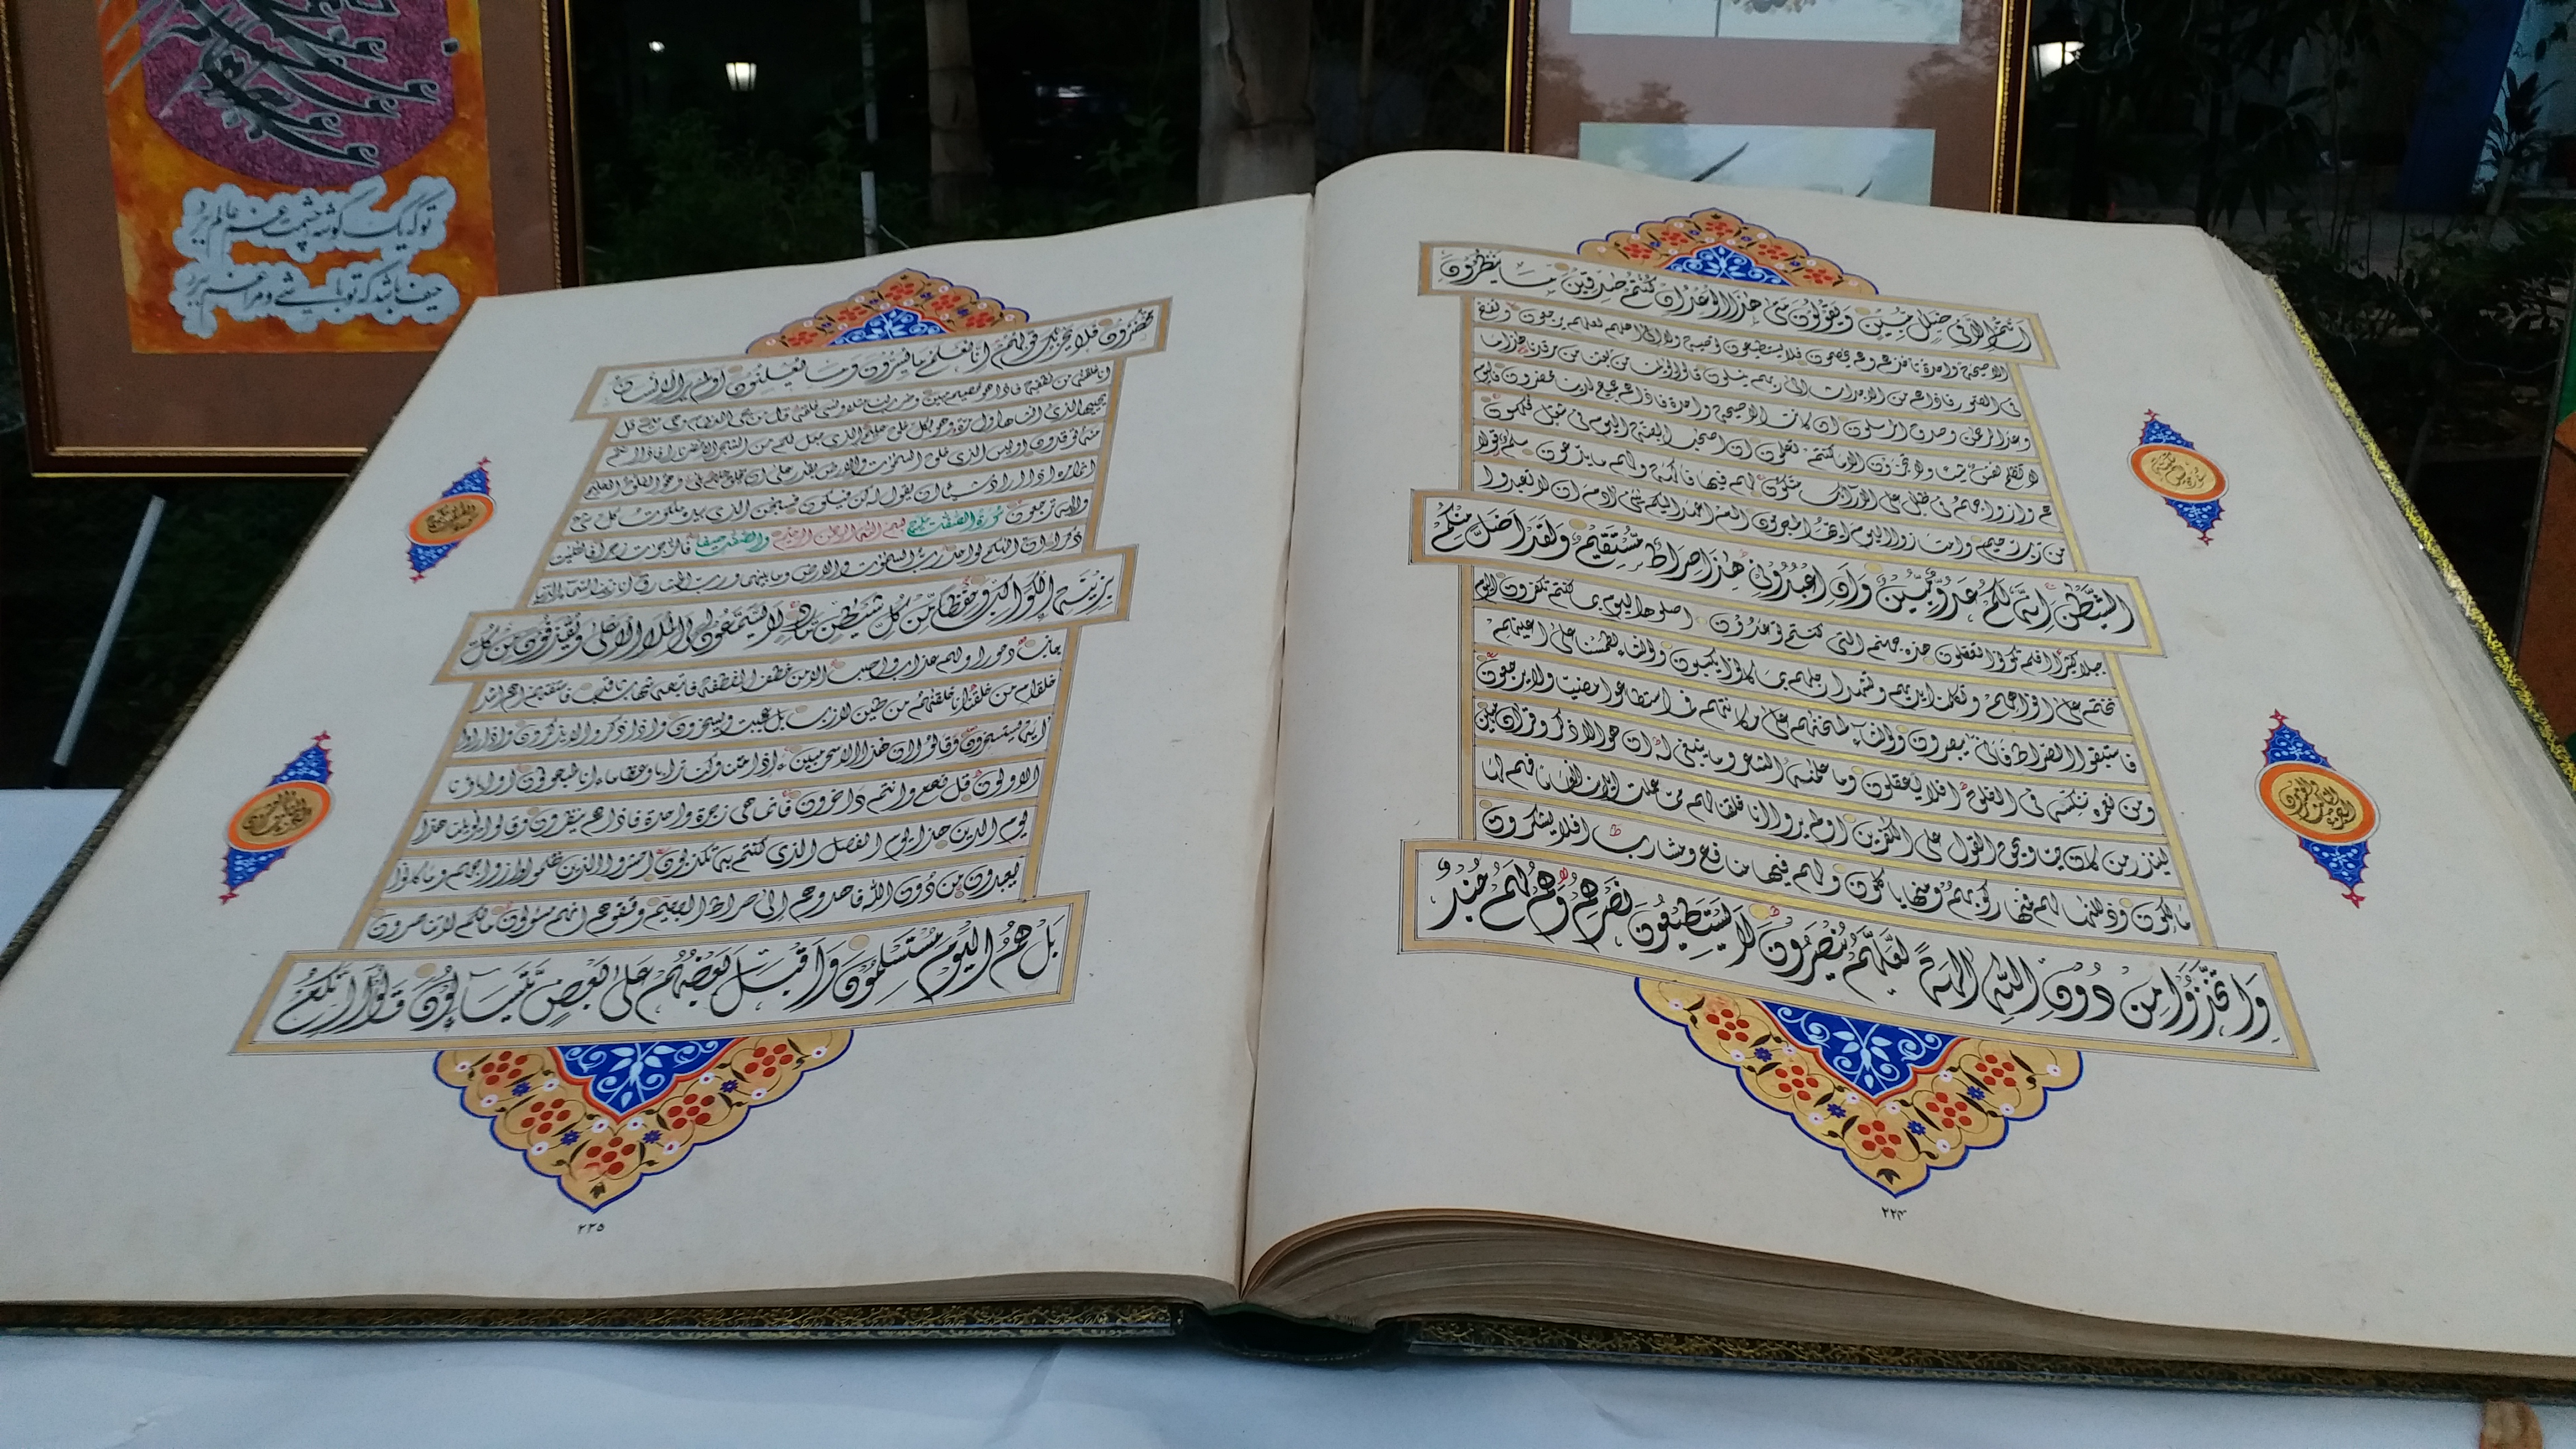 Calligraphy in the exhibition of Quranic manuscripts